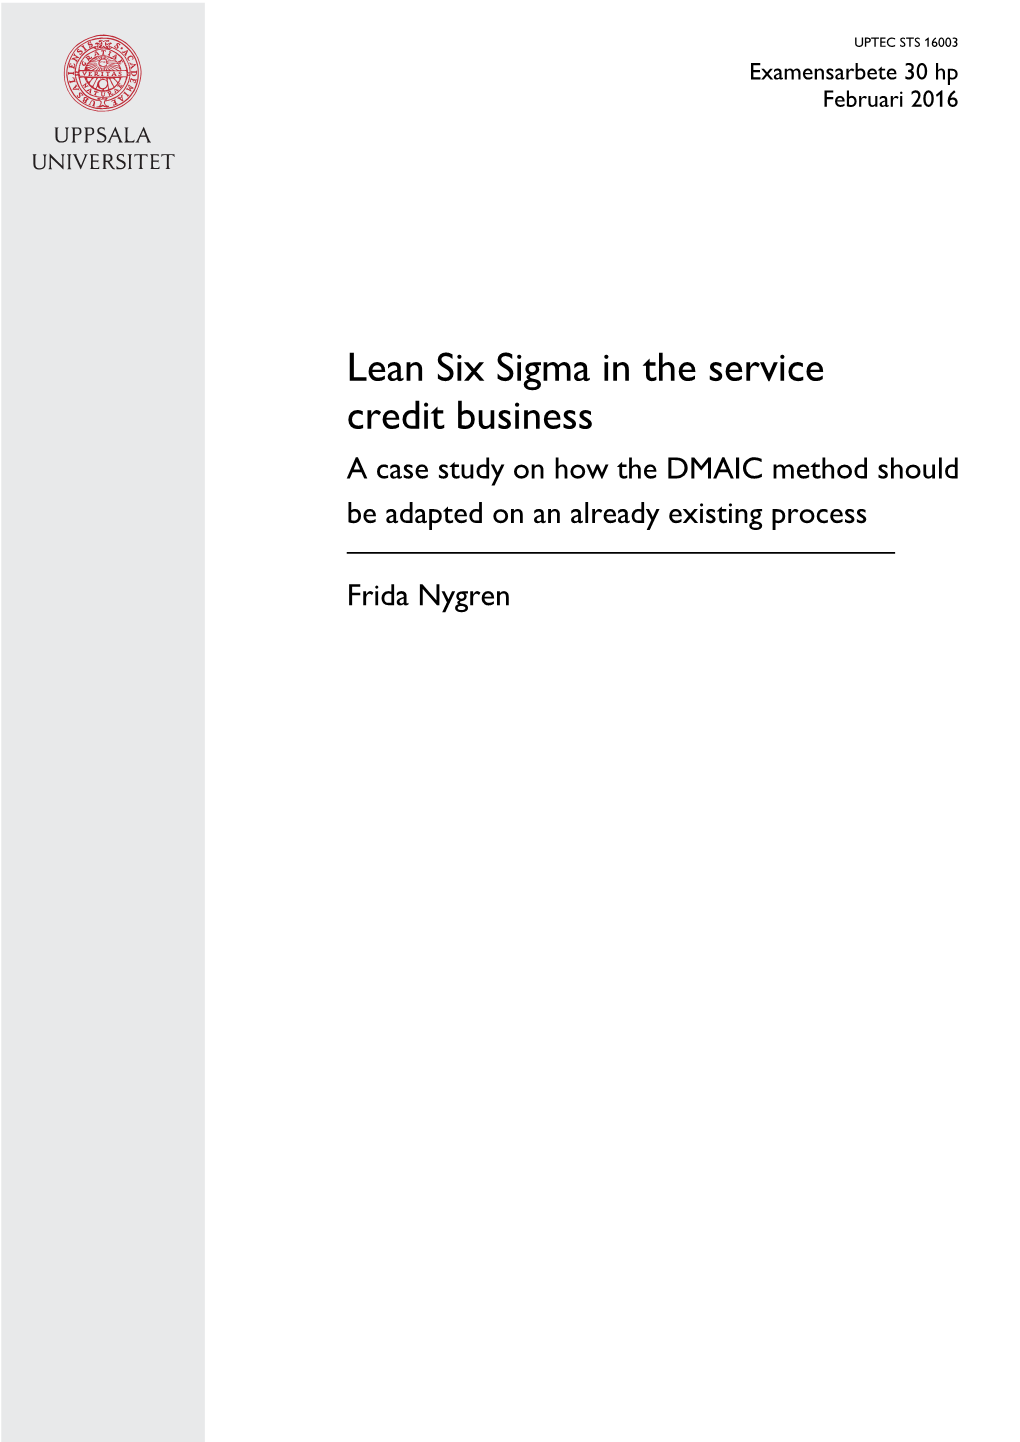 Lean Six Sigma in the Service Credit Business a Case Study on How the DMAIC Method Should Be Adapted on an Already Existing Process